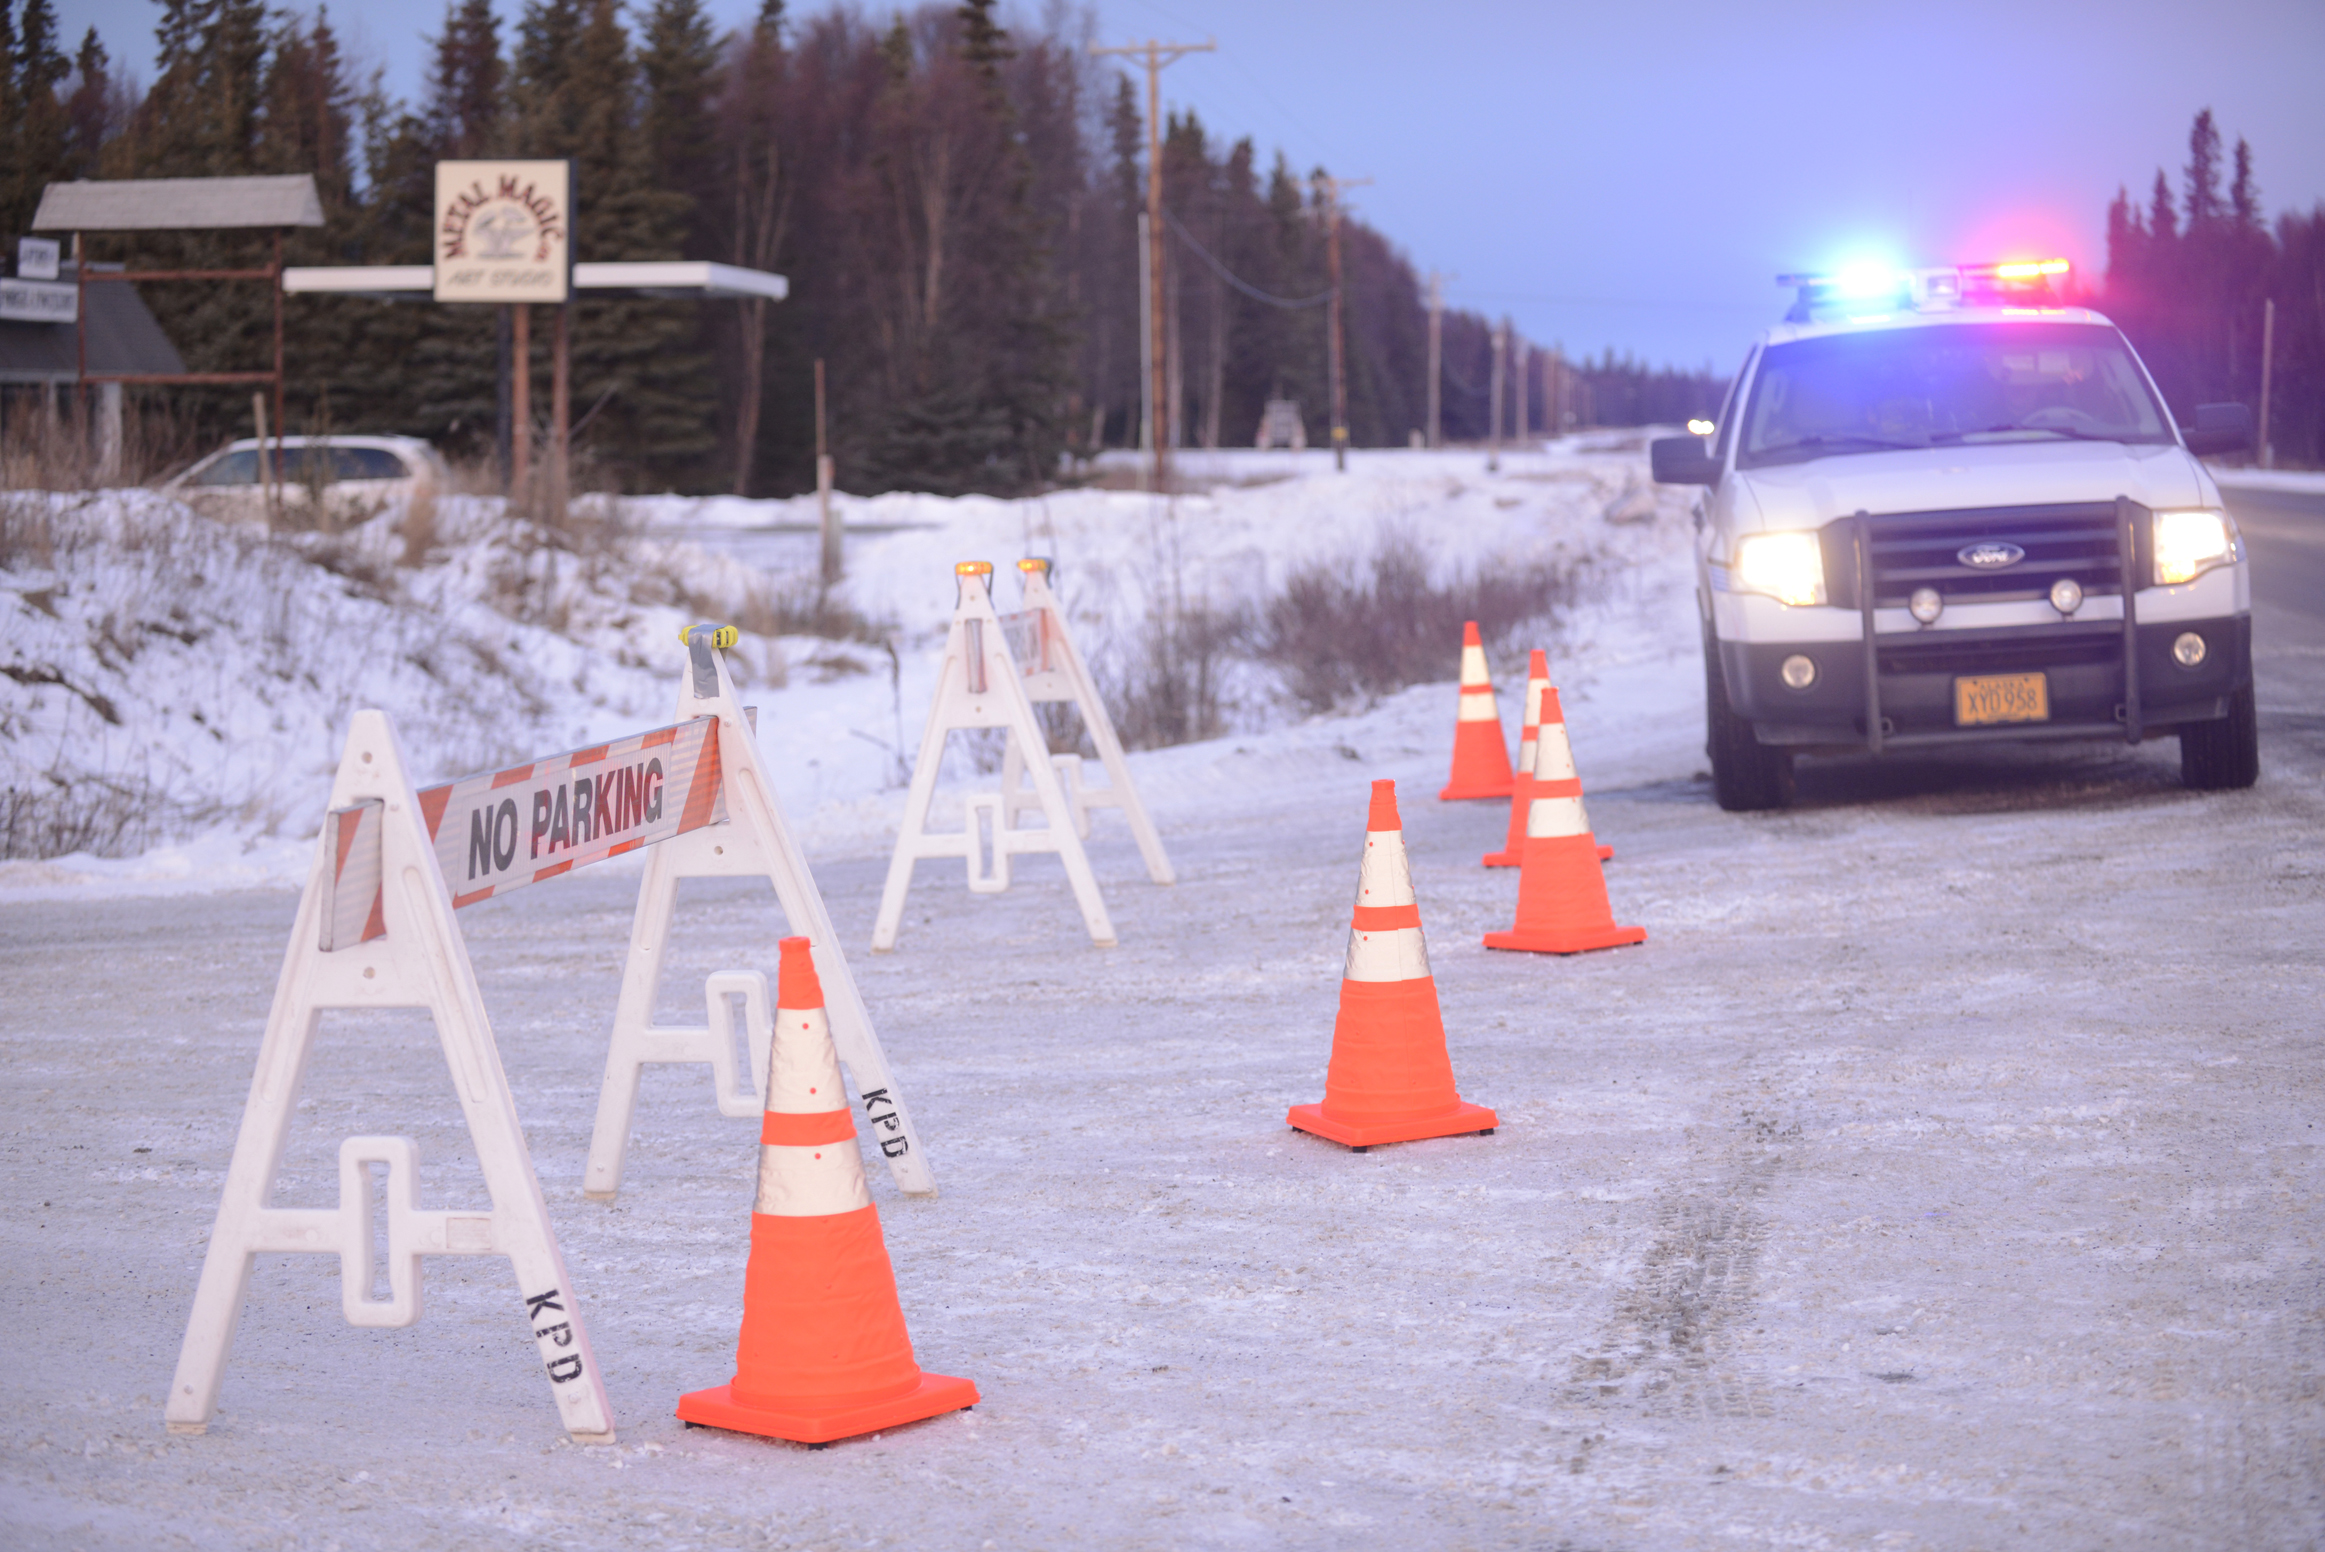 Enstar Natural Gas personnel work at the intersection of Lilac Lane and the Kenai Spur Highway after shutting off the area's gas supply on Sunday, Jan. 24, 2016 in Kenai, Alaska. A 7.1 magnitude earthquake caused gas explosions in four houses along Lilac Lane.